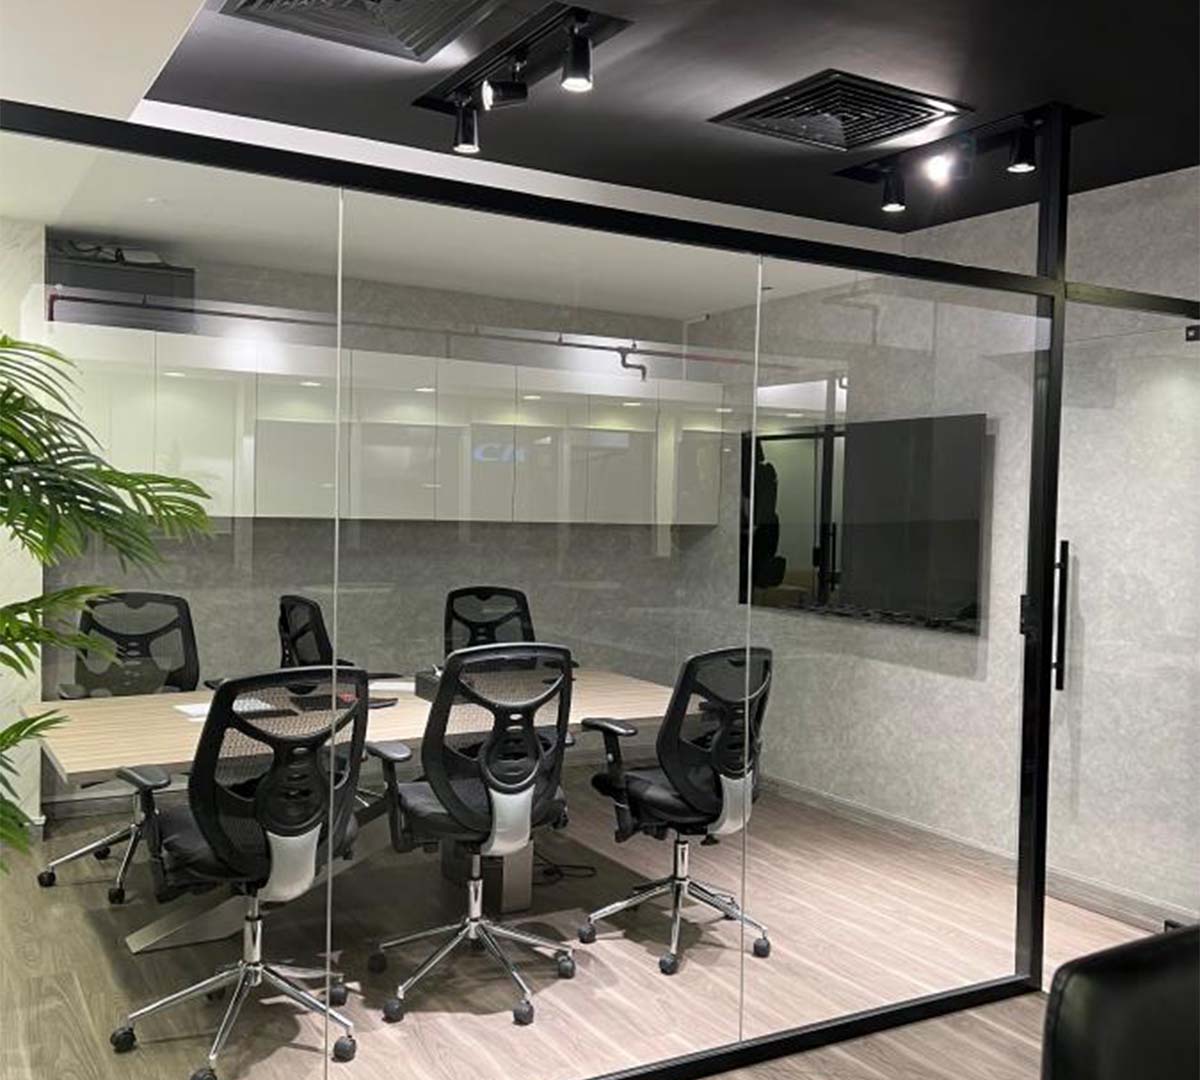 Black chairs placed in an office partitionaround a table